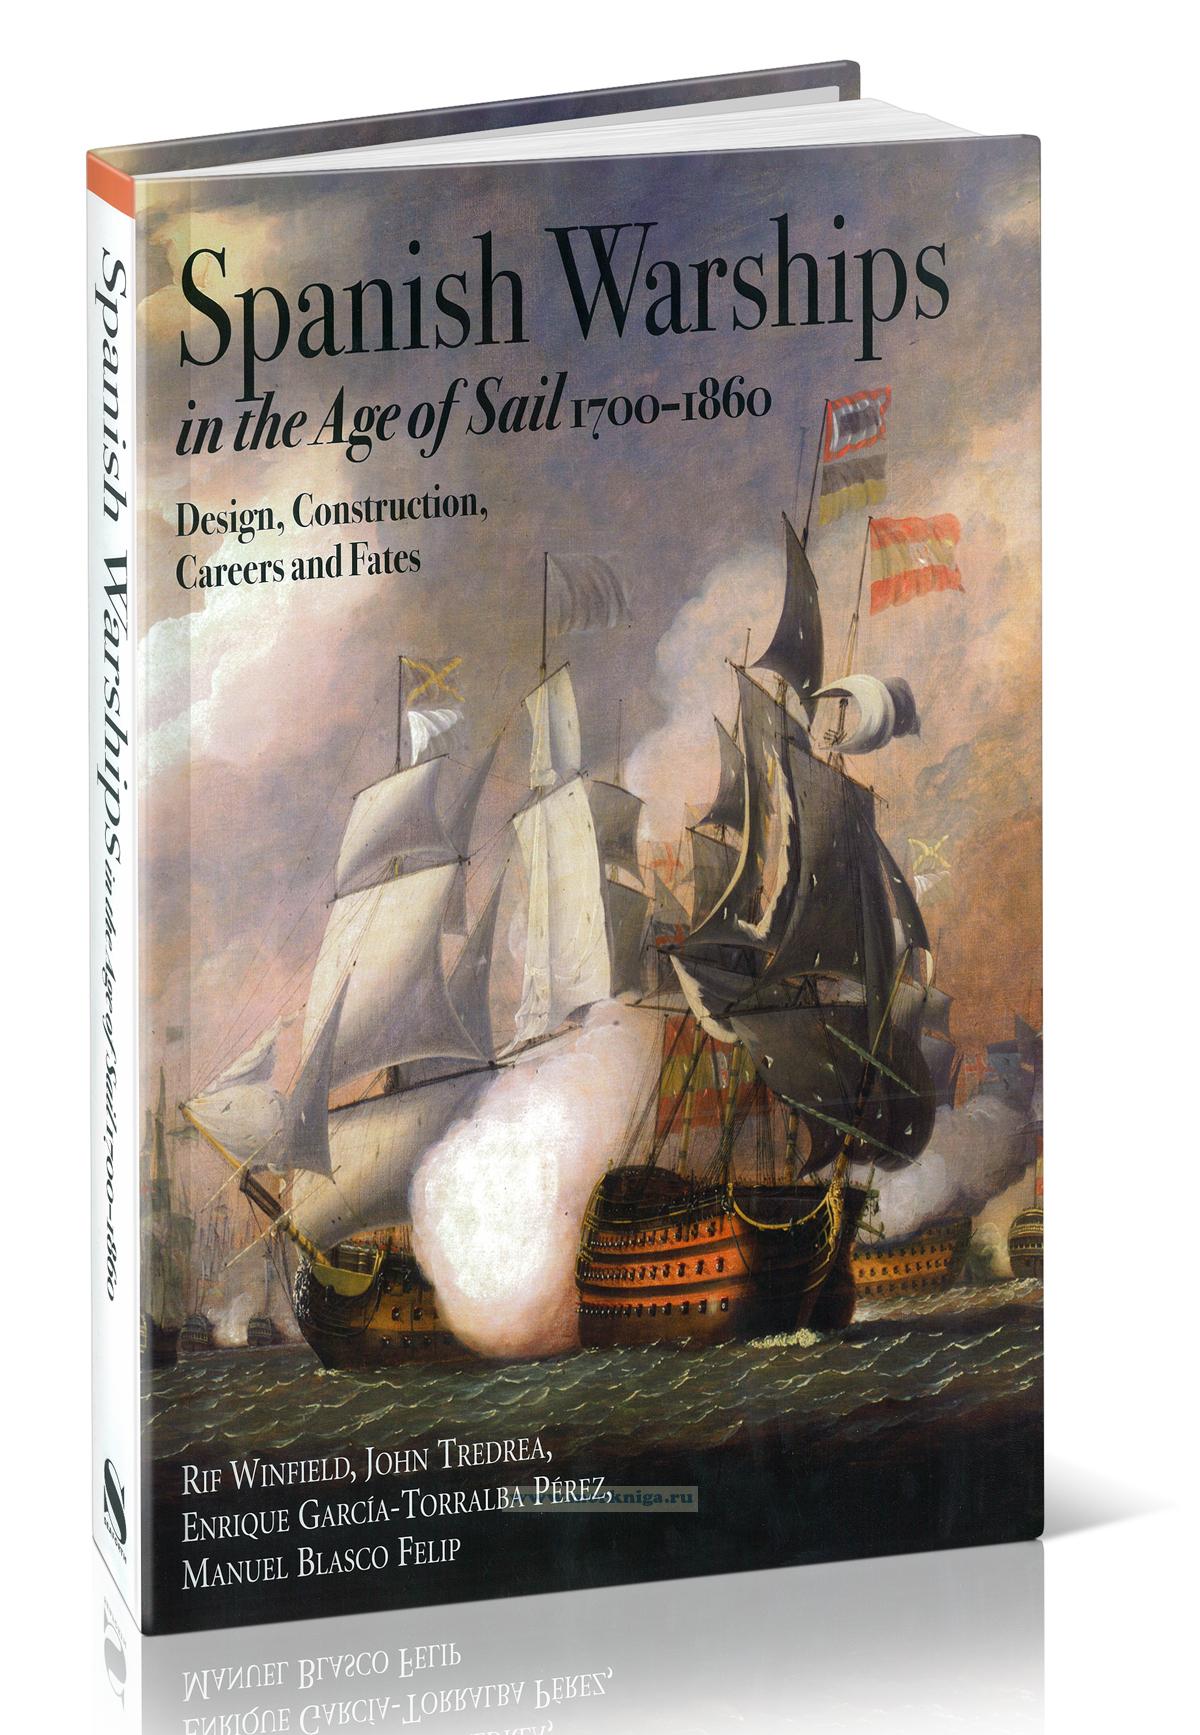 Spanish Warships in the Age of Sail, 1700-1860. Design, Construction, Careers and Fates